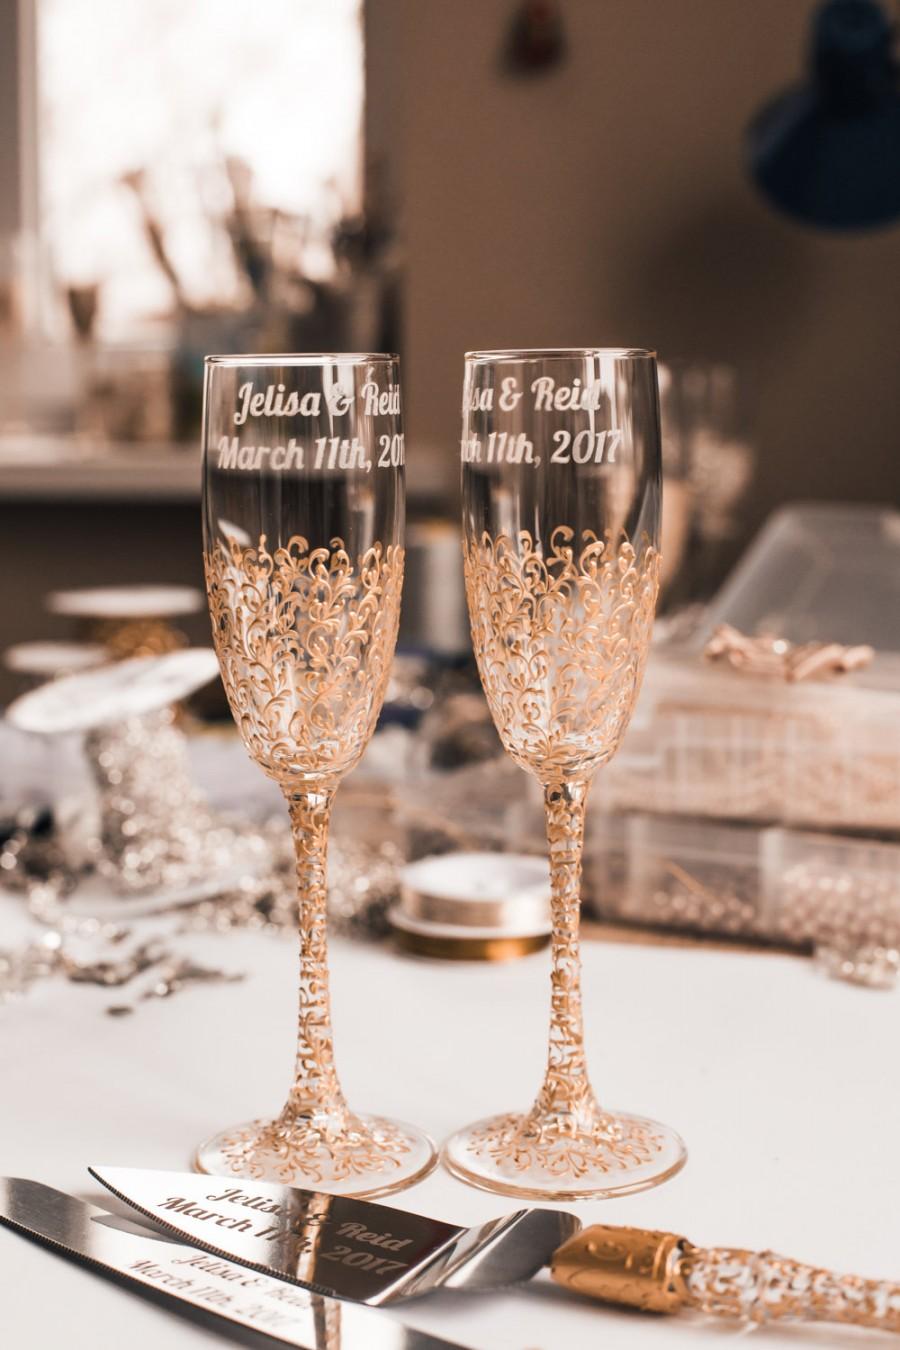 Wedding - personalized wedding glasses Toasting flutes gold Glasses bride and groom Champagne glasses gold Wedding flutes Toasting flutes set of 2